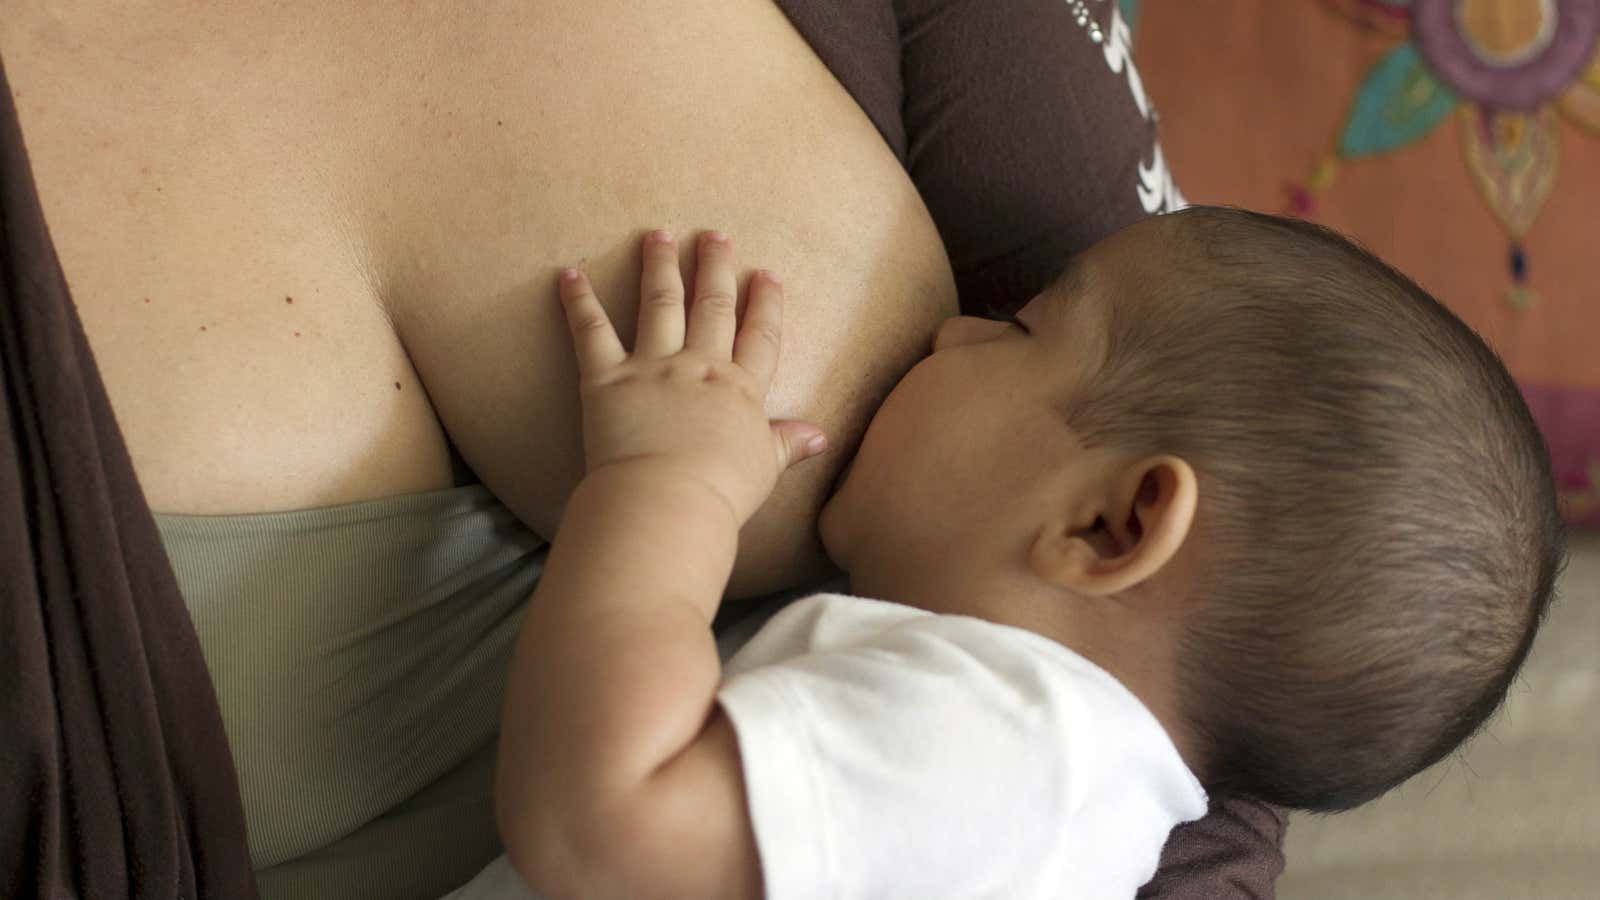 Does Breastfeeding Make Your Baby Smarter? And Does It Matter?